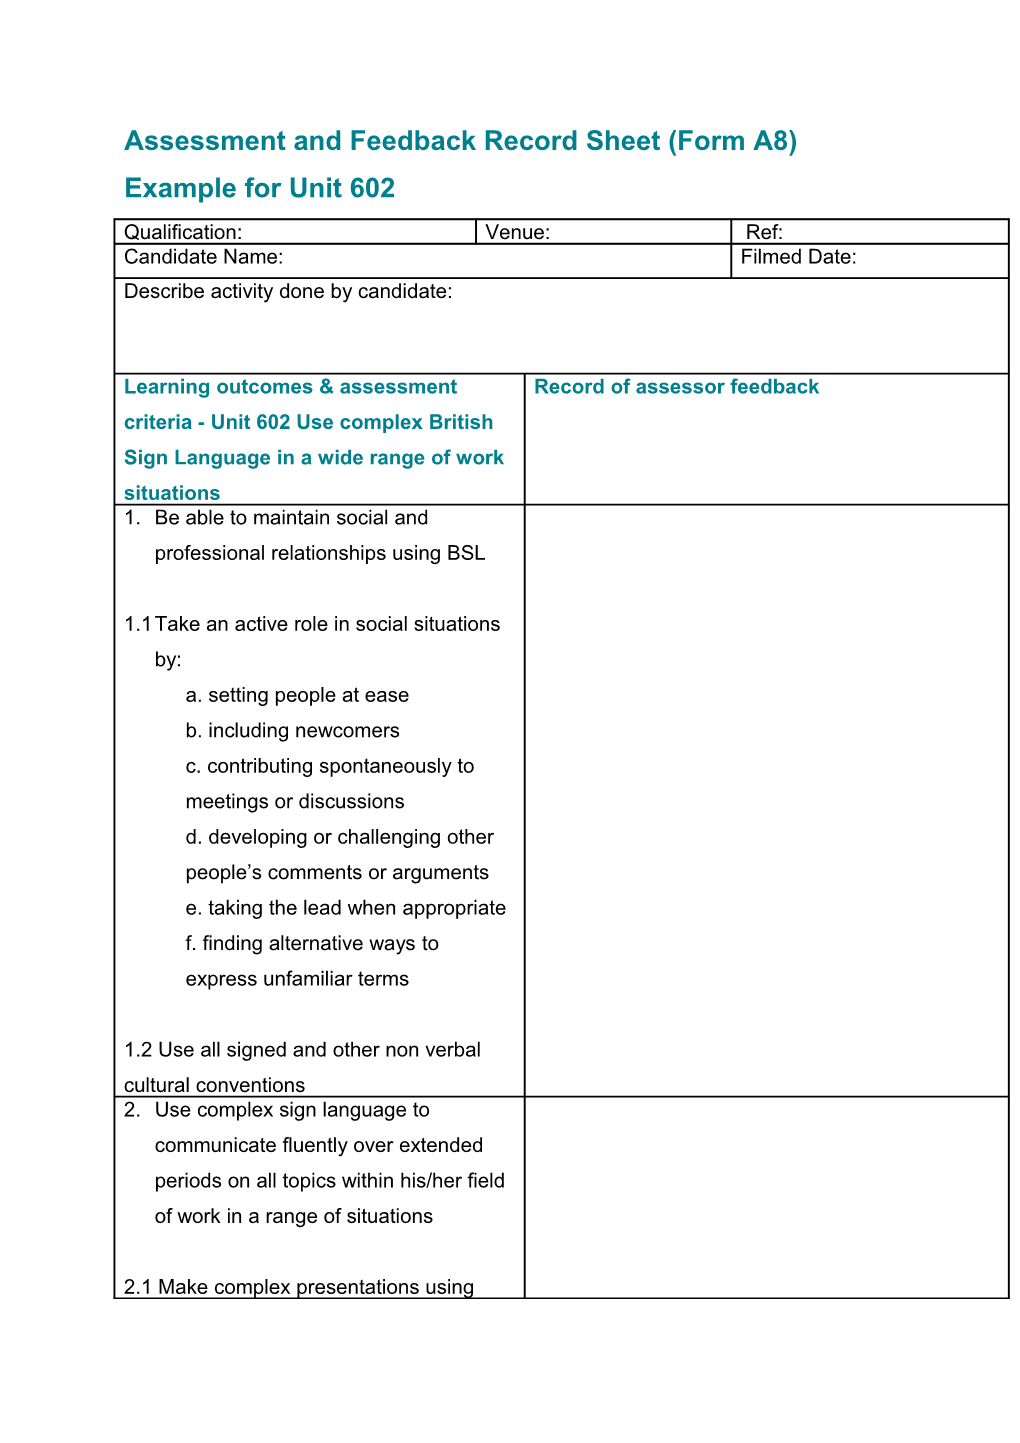 Assessment and Feedback Record Sheet (Form A8)